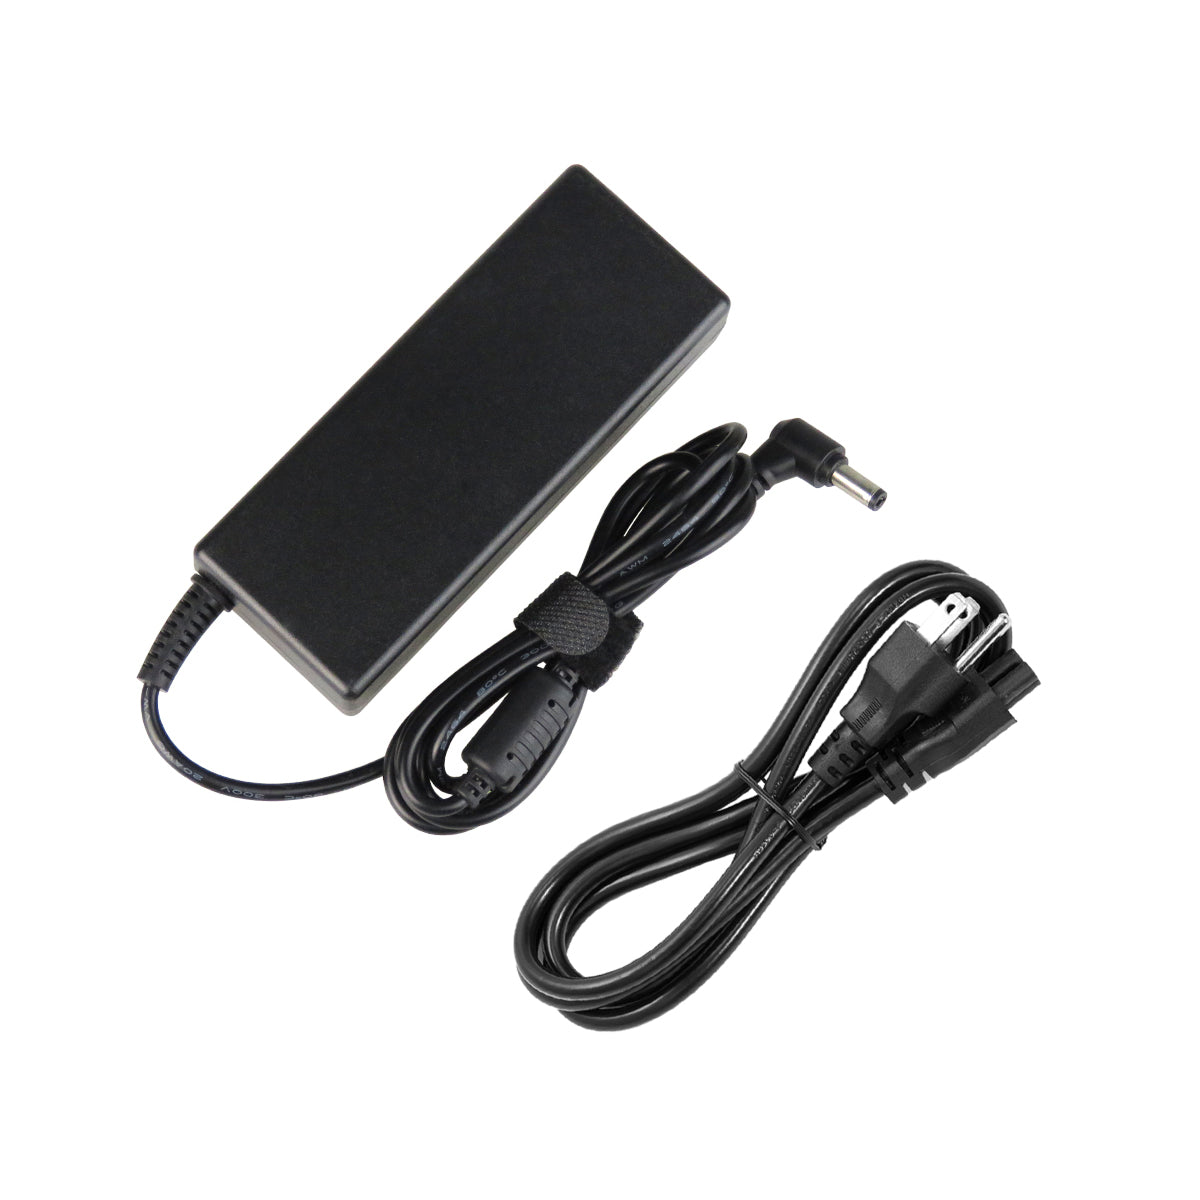 AC Adapter Charger for Gateway MX8741 Notebook.